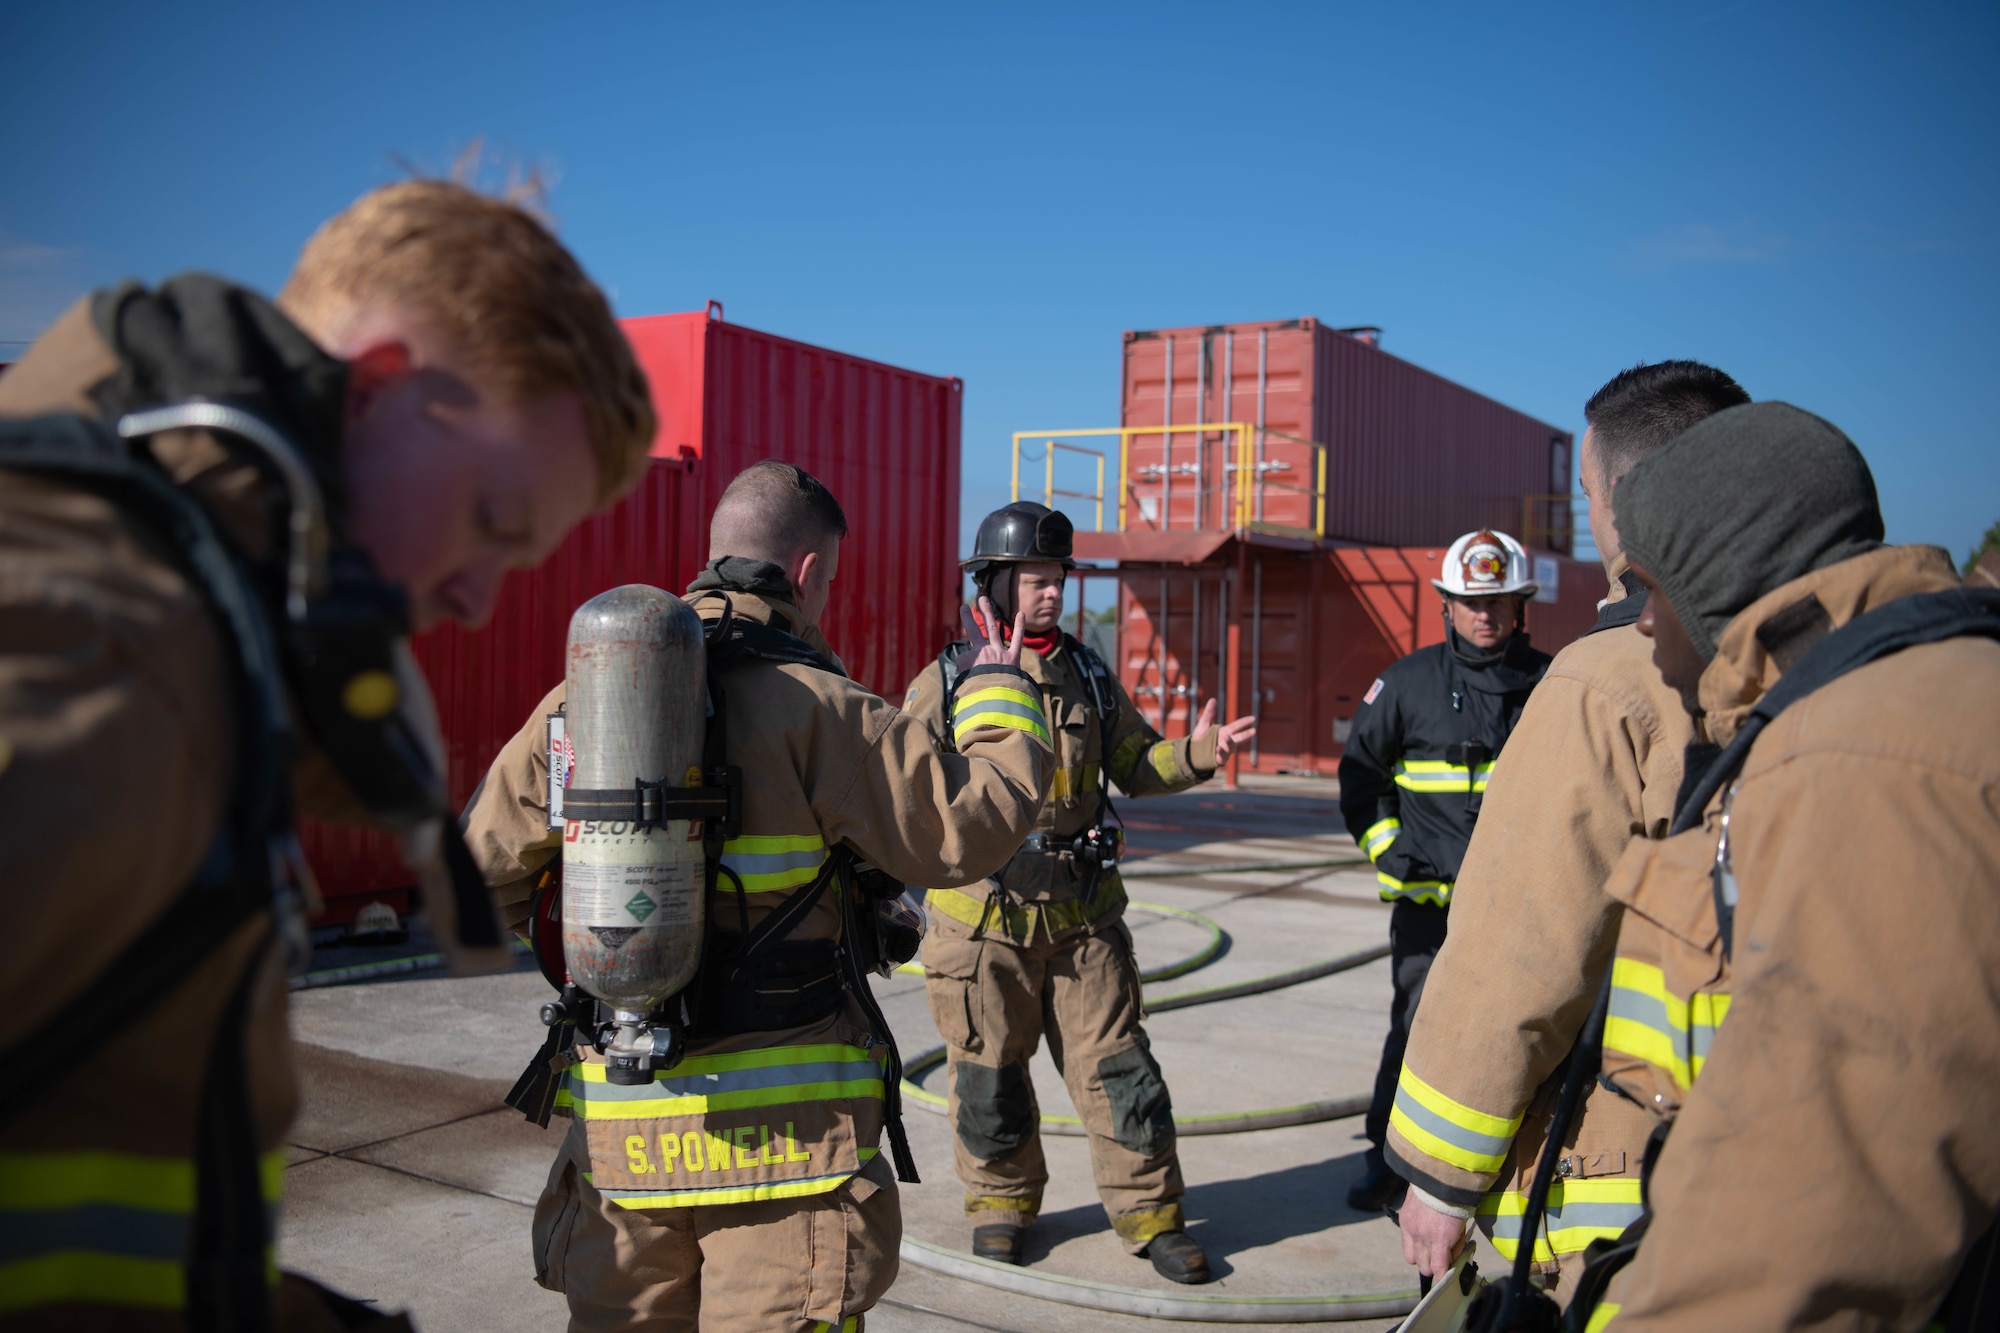 A group of firefighters speak in front of two red buildings.